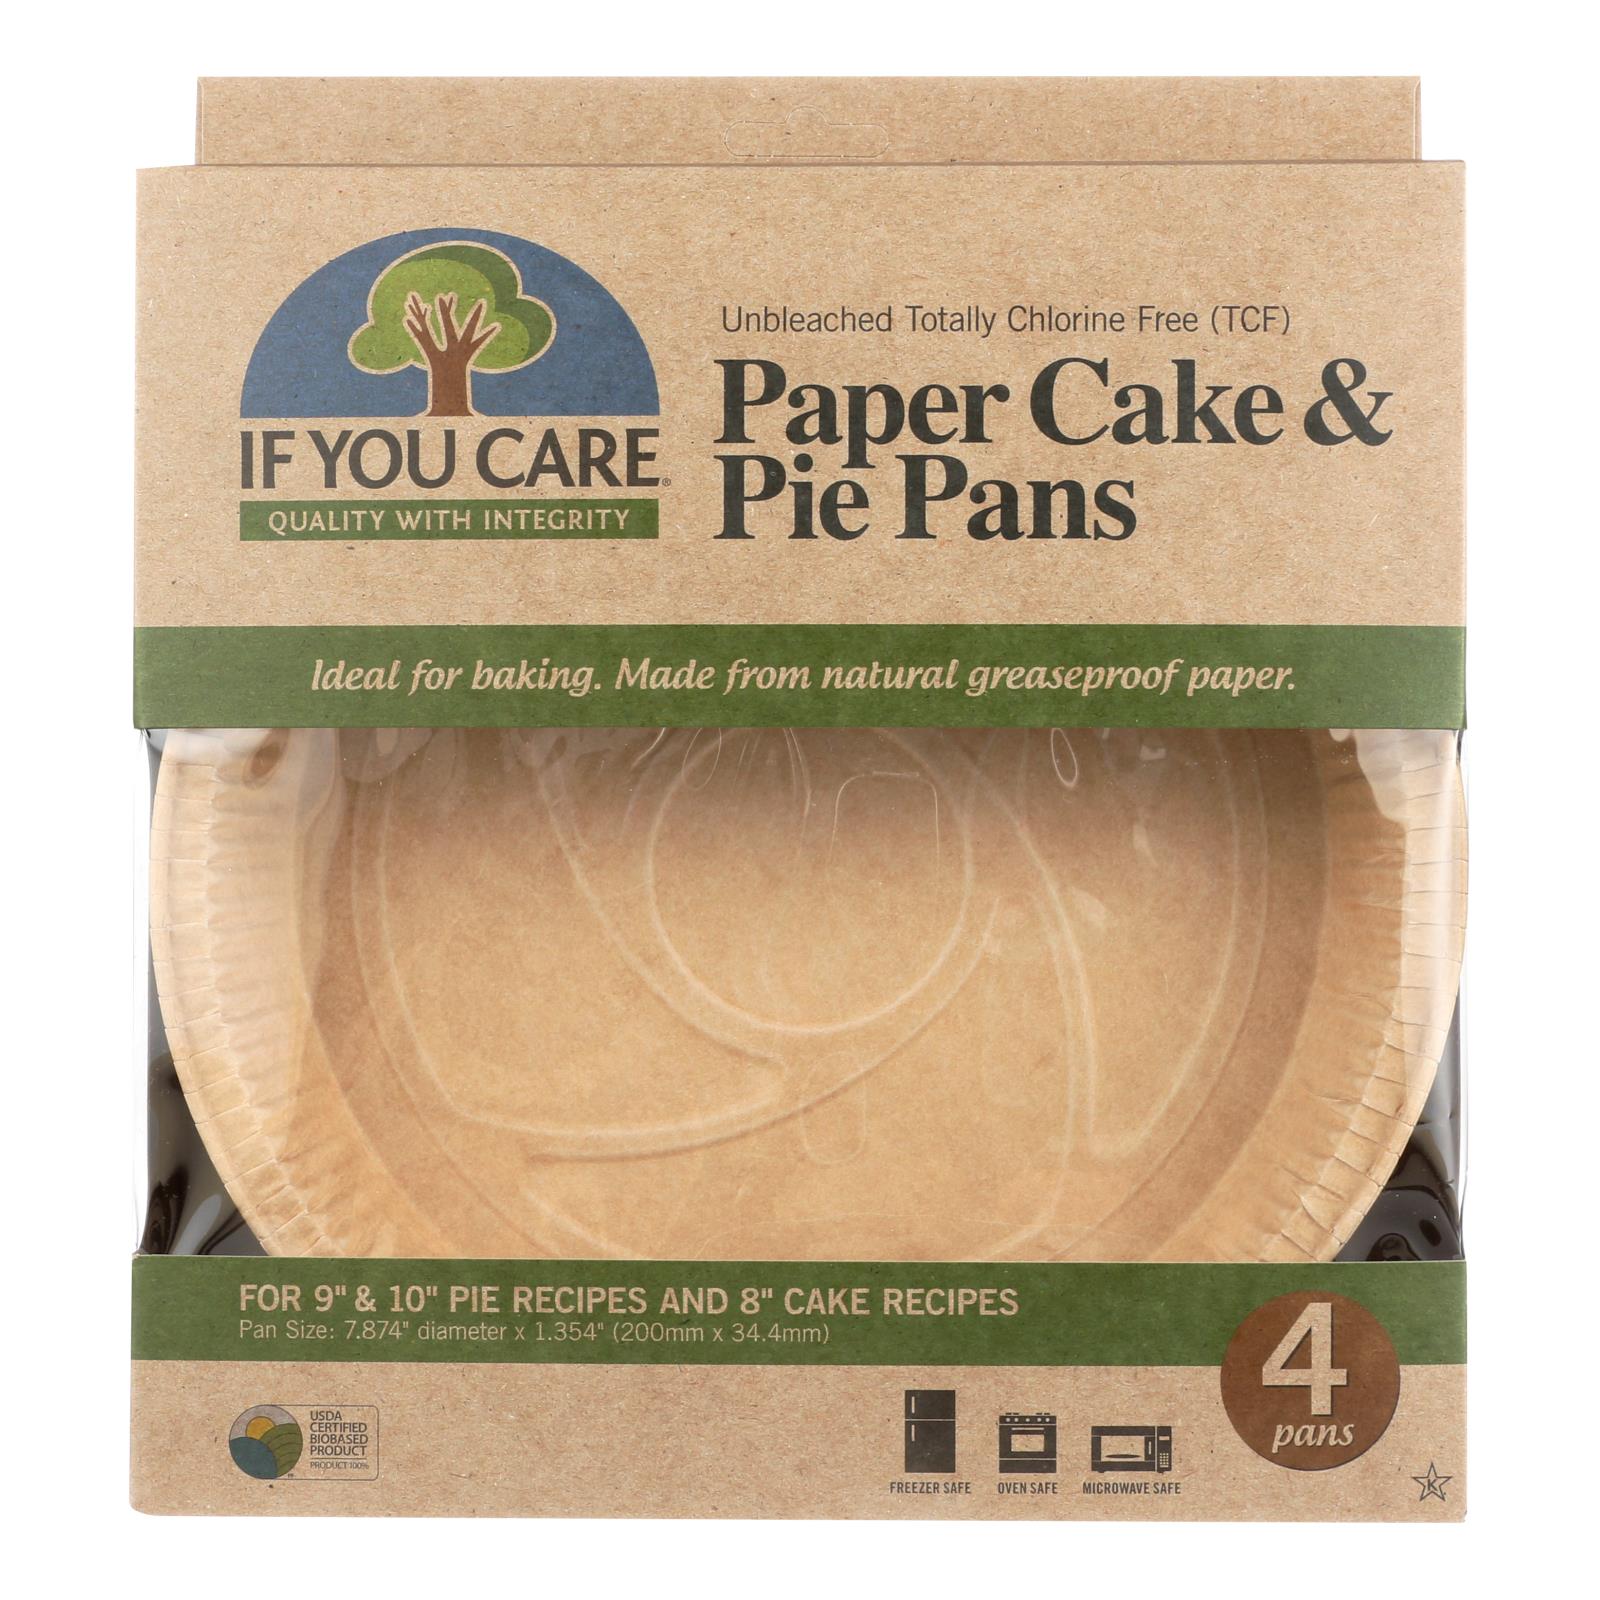 If You Care Pie Baking Pans - Paper Cake - 6개 묶음상품 - 4 Count